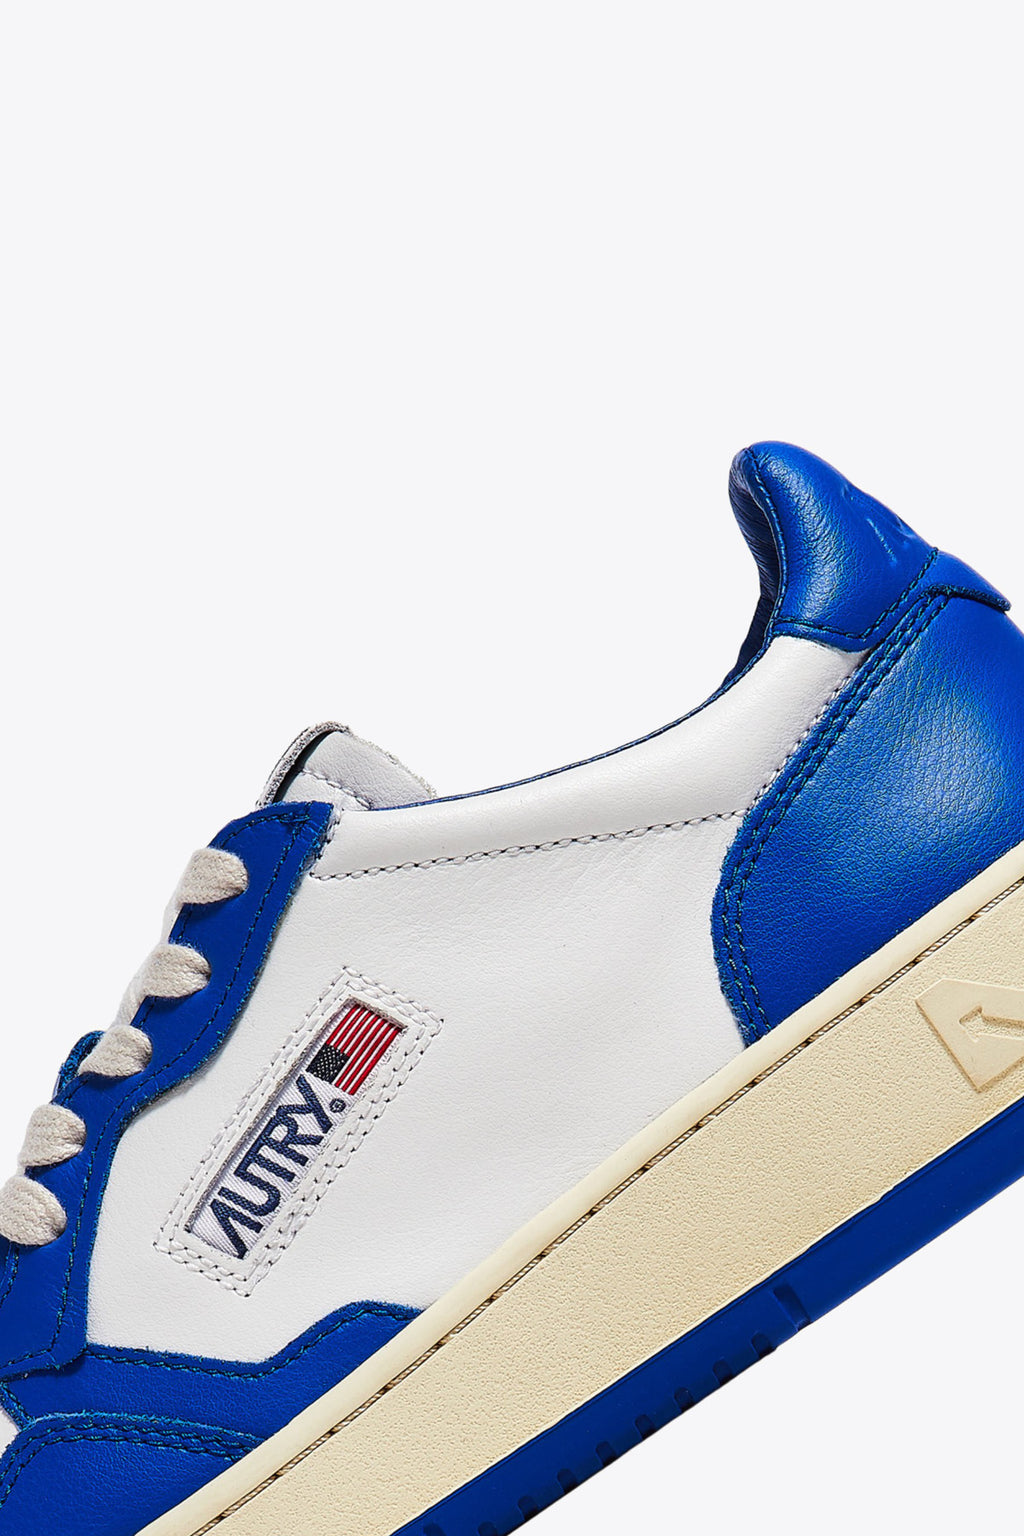 alt-image__Royal-blue-and-white-leather-low-sneaker---Medalist